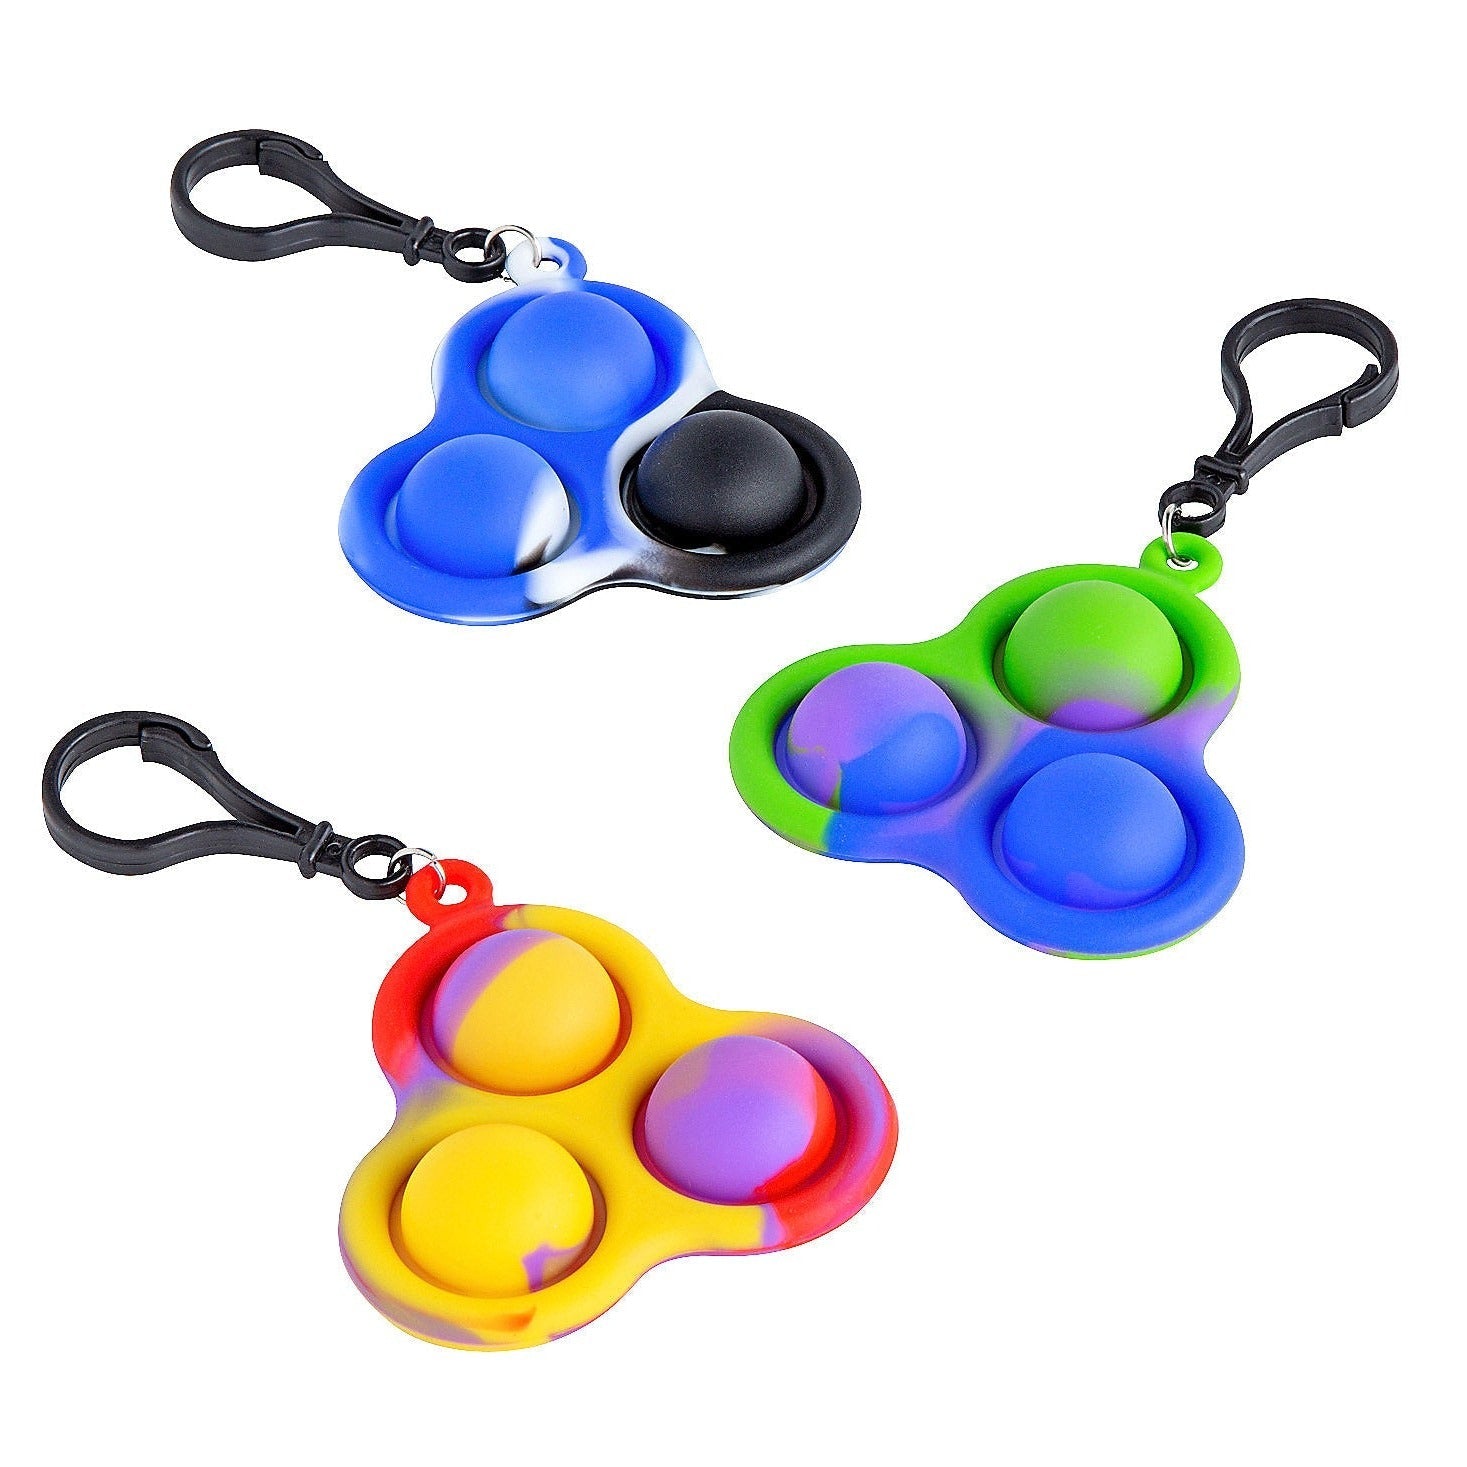 Triple Pop Key Chain, The Triple Pop Key Chain is a keychain version of this hugely popular trend line that behaves like reusable bubble wrap. This colourful Triple Pop Key Chain pad features a set of three of bubbles that make a satisfying pop sound when pushed inwards. After one press, the bubble then appears on the other side, ready to be pushed and popped all over again. This fiddle toy is immensely satisfying to use, and is proving to be a big hit with popular Tik Tok users and other social media influ